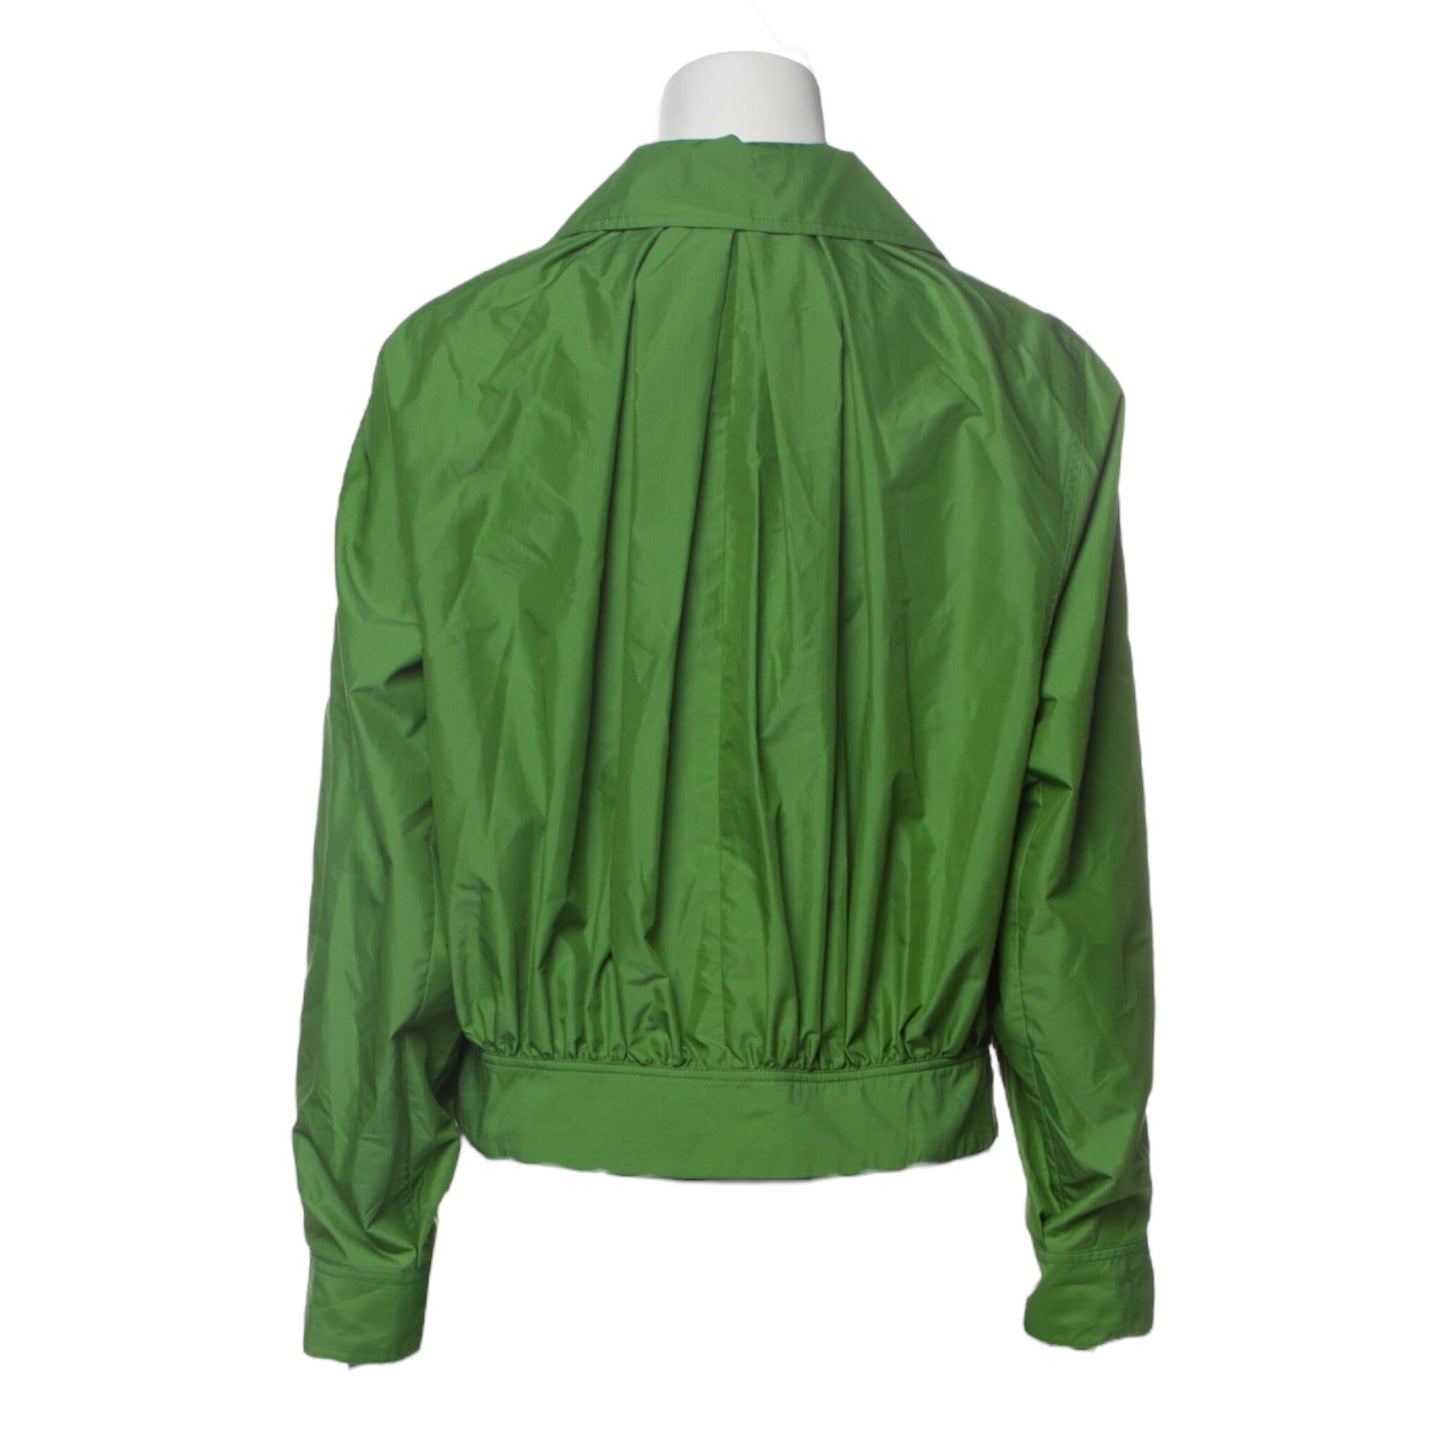 3.1 Phillip Lim Bomber Jacket in Green Size XS